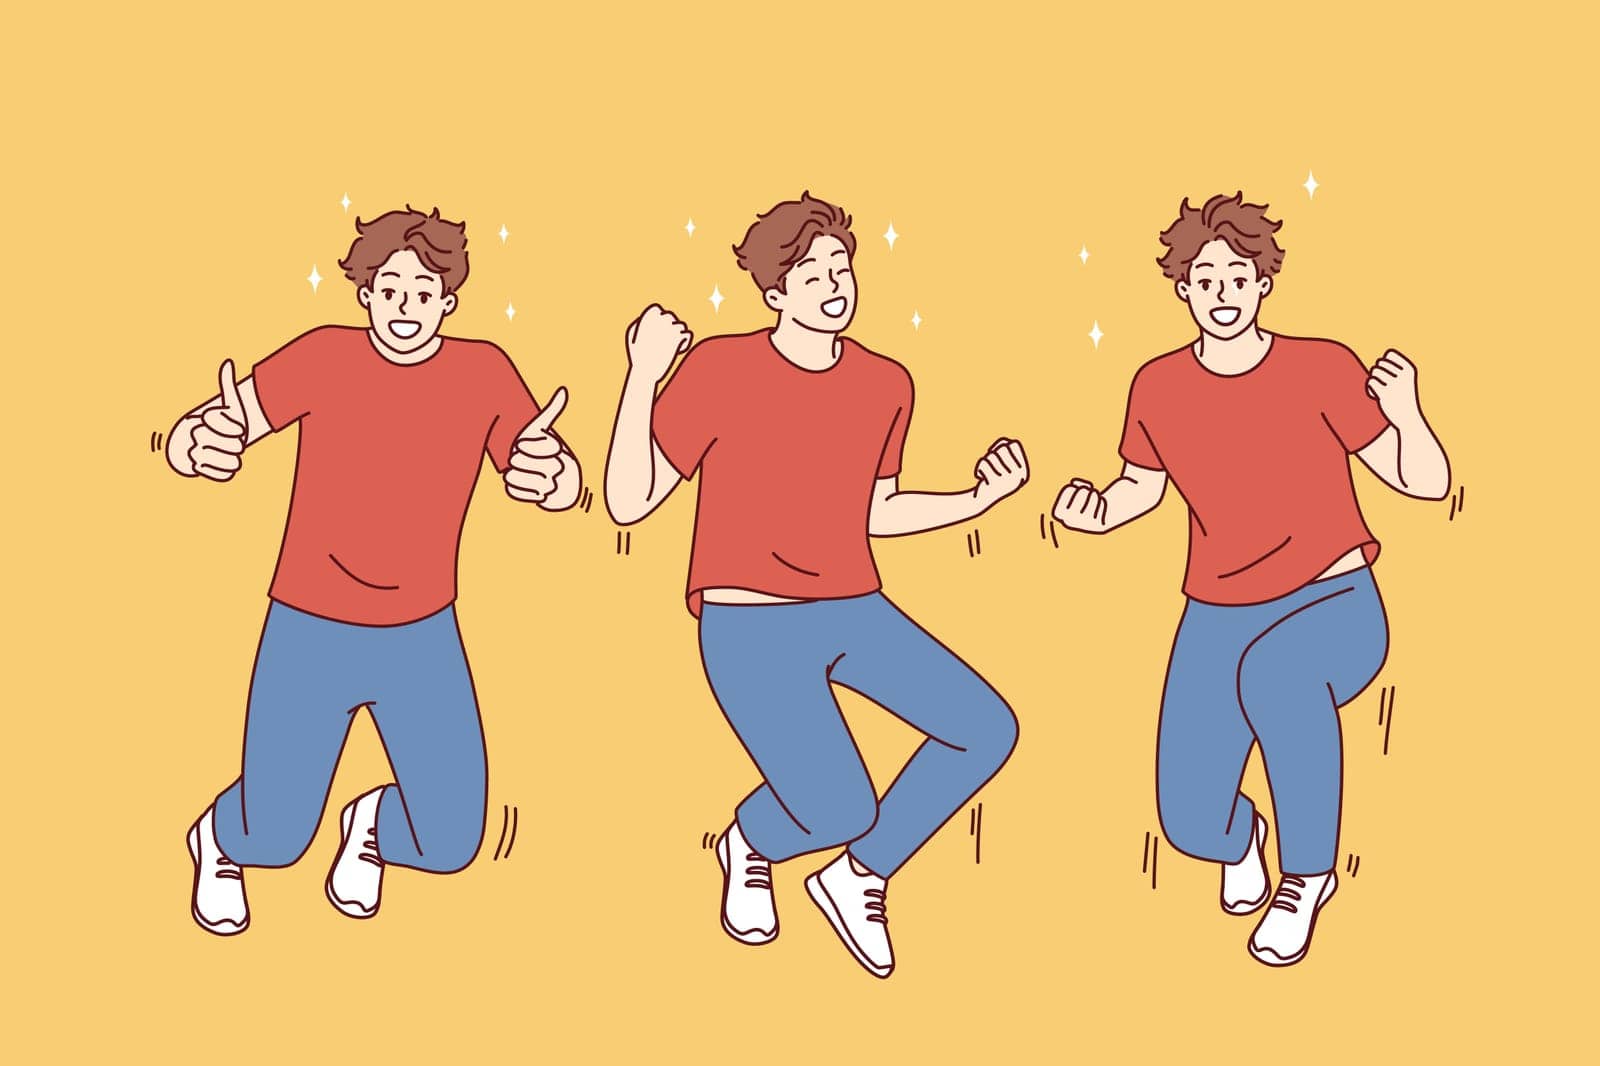 Jumping young man making winning gestures feeling joy and happiness from winning bet or jackpot. Guy in casual clothes and sneakers show overjoyed at achieving ambitious goals. Flat vector image